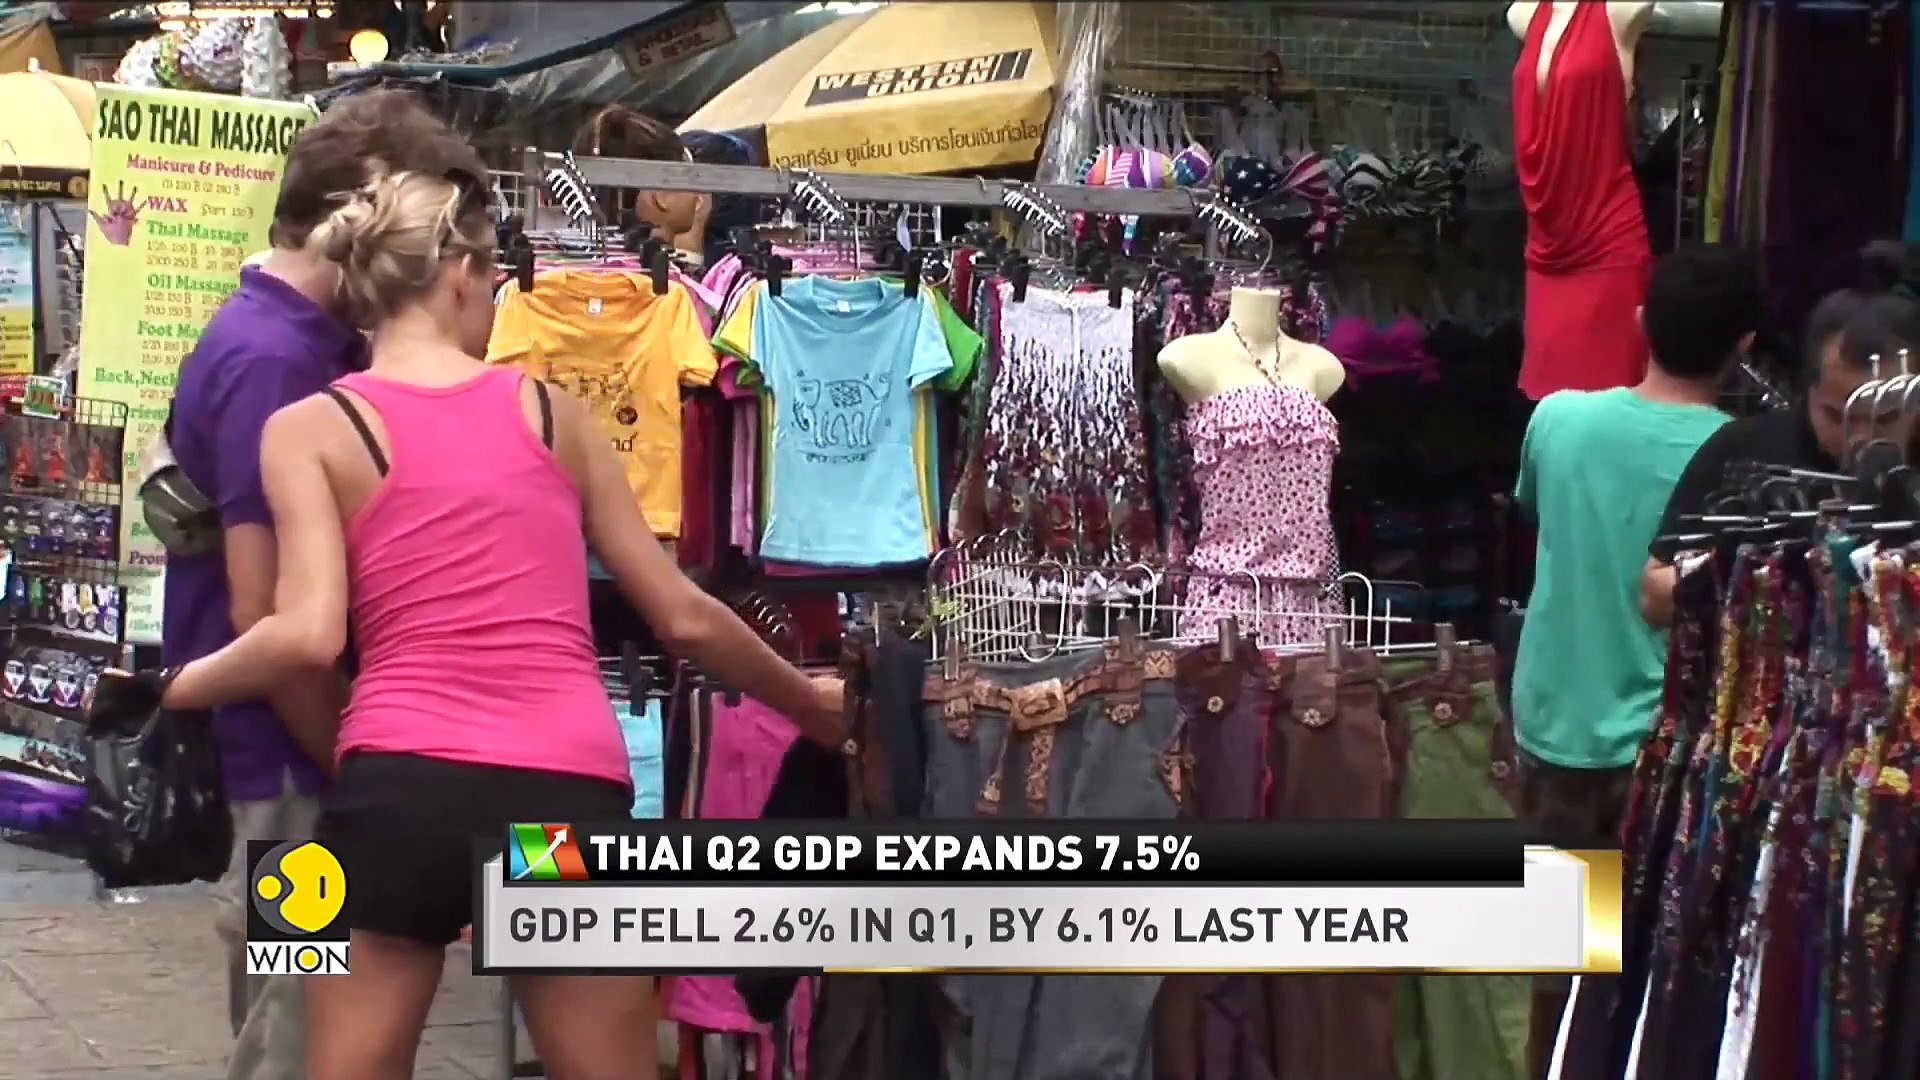 Thailand witnesses expansion in Q2 GDP by 7.5% | Latest News Updates | English News | WION